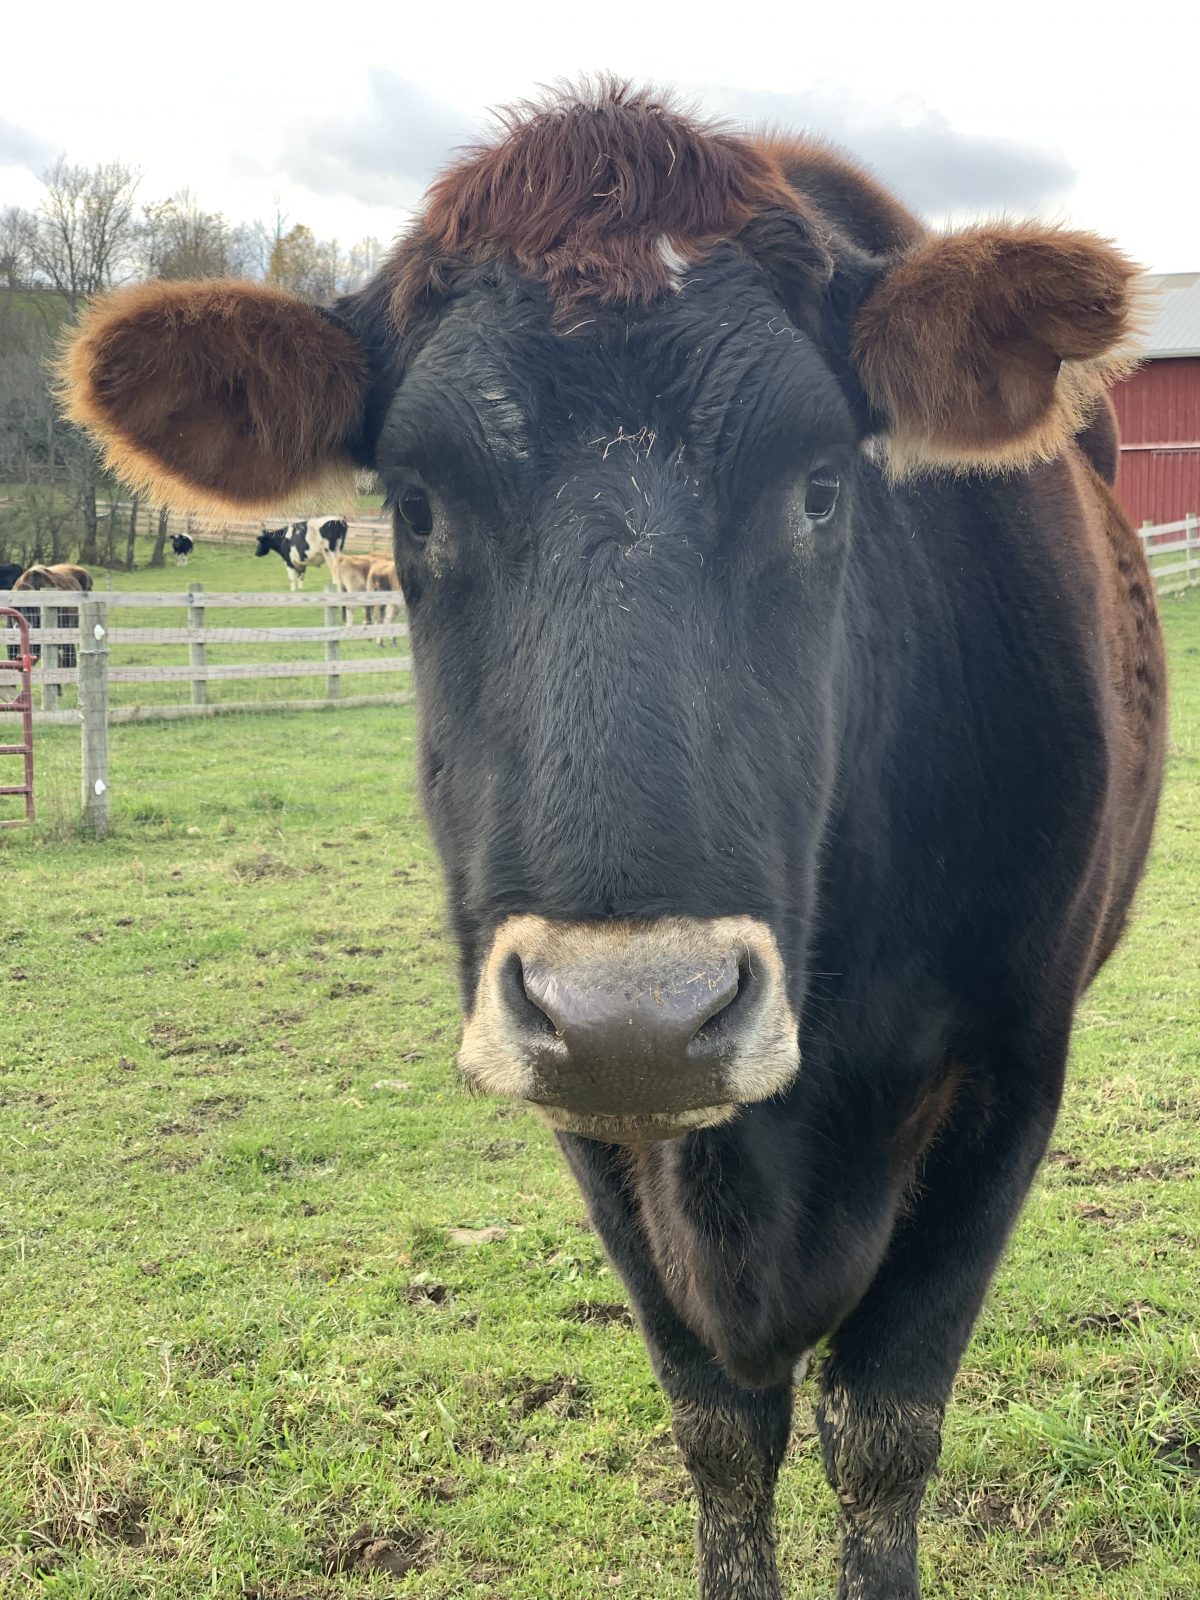 Norman steer in the pasture at Farm Sanctuary